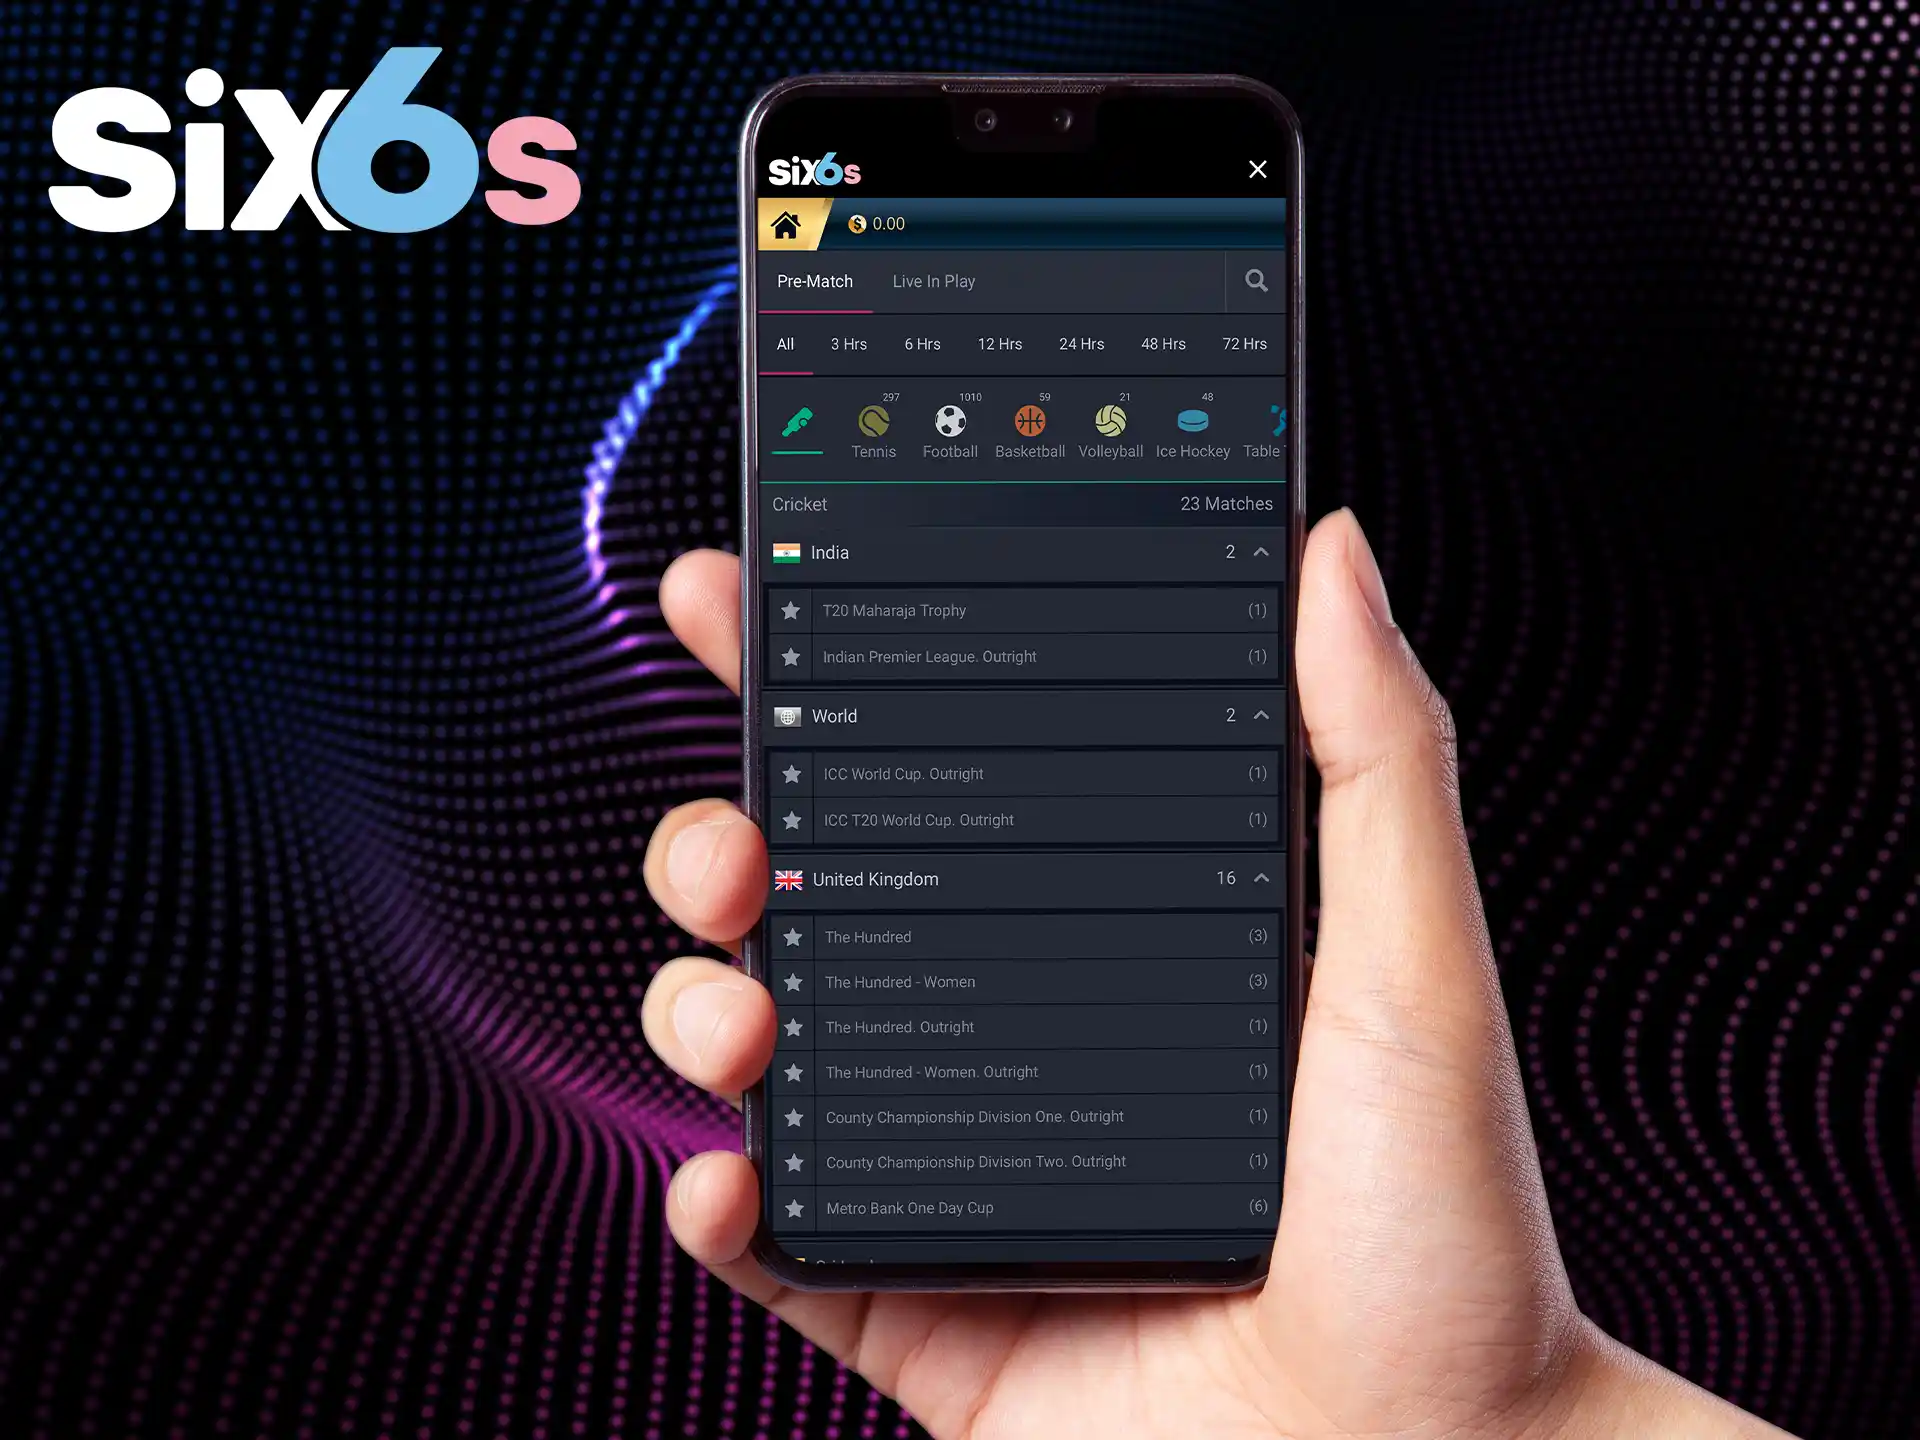 Six6s online sportsbook offers high odds cricket betting with a mobile app.